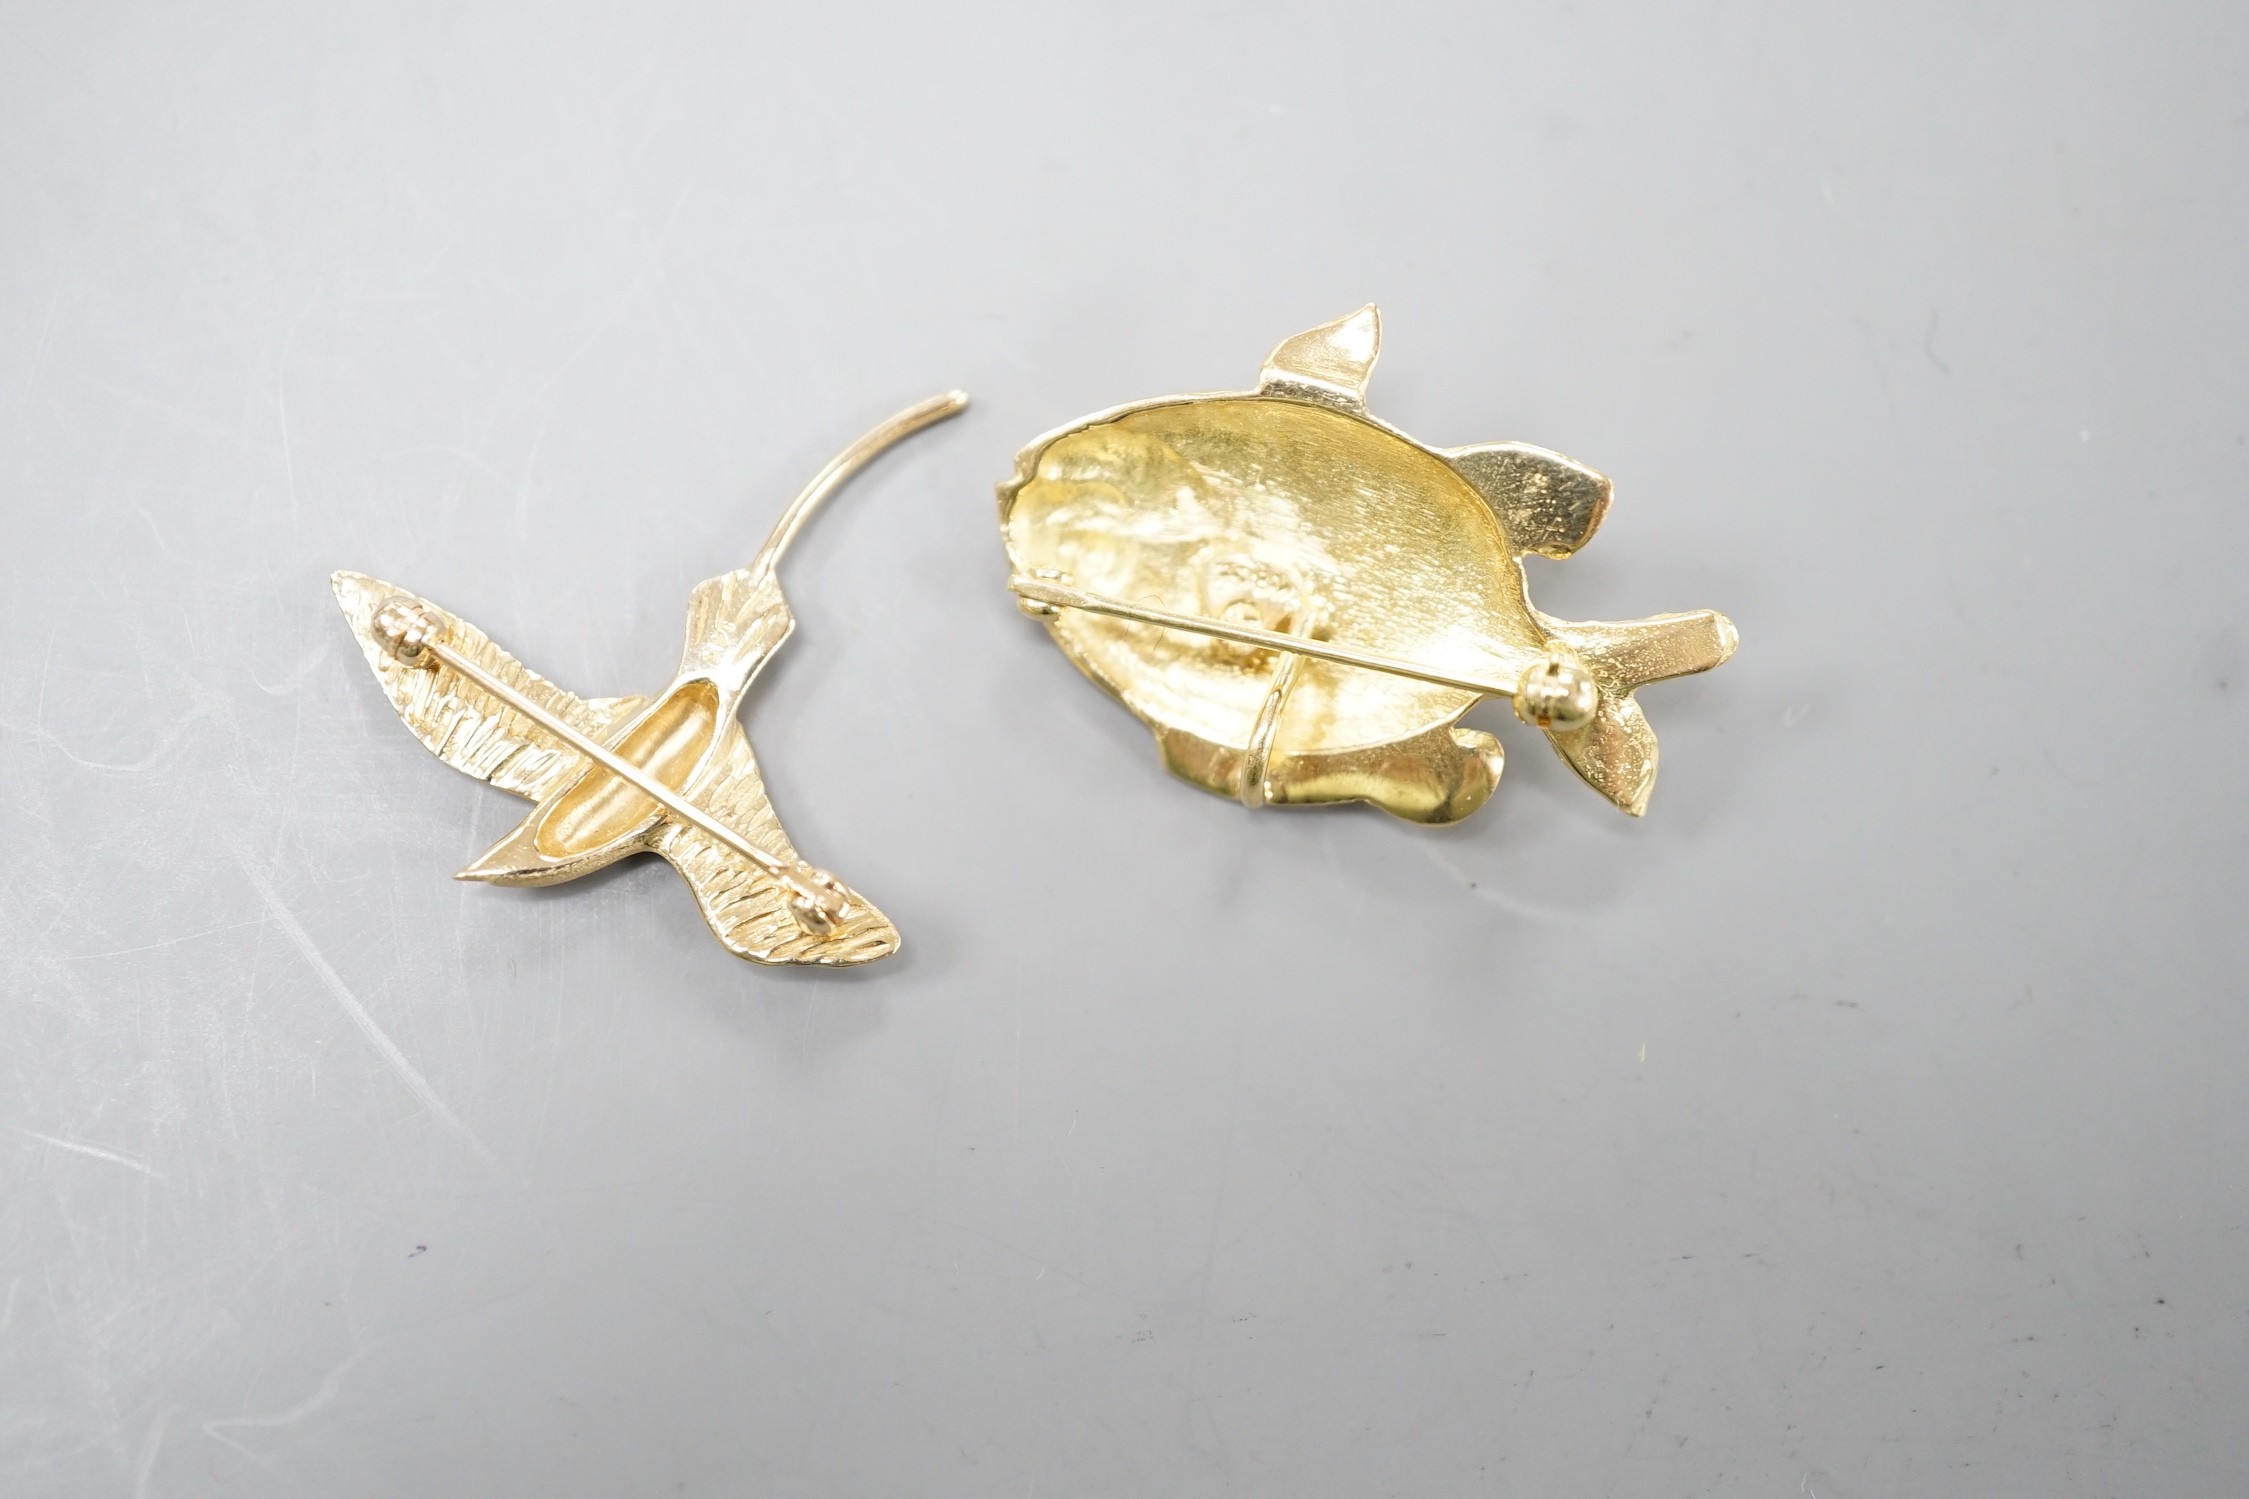 A 14k yellow metal bird brooch modelled as a Bermuda Longtail, 31mm, 2.9 grams and an Astwood Dickenson 18ct fish pendant brooch, 6.5 grams.